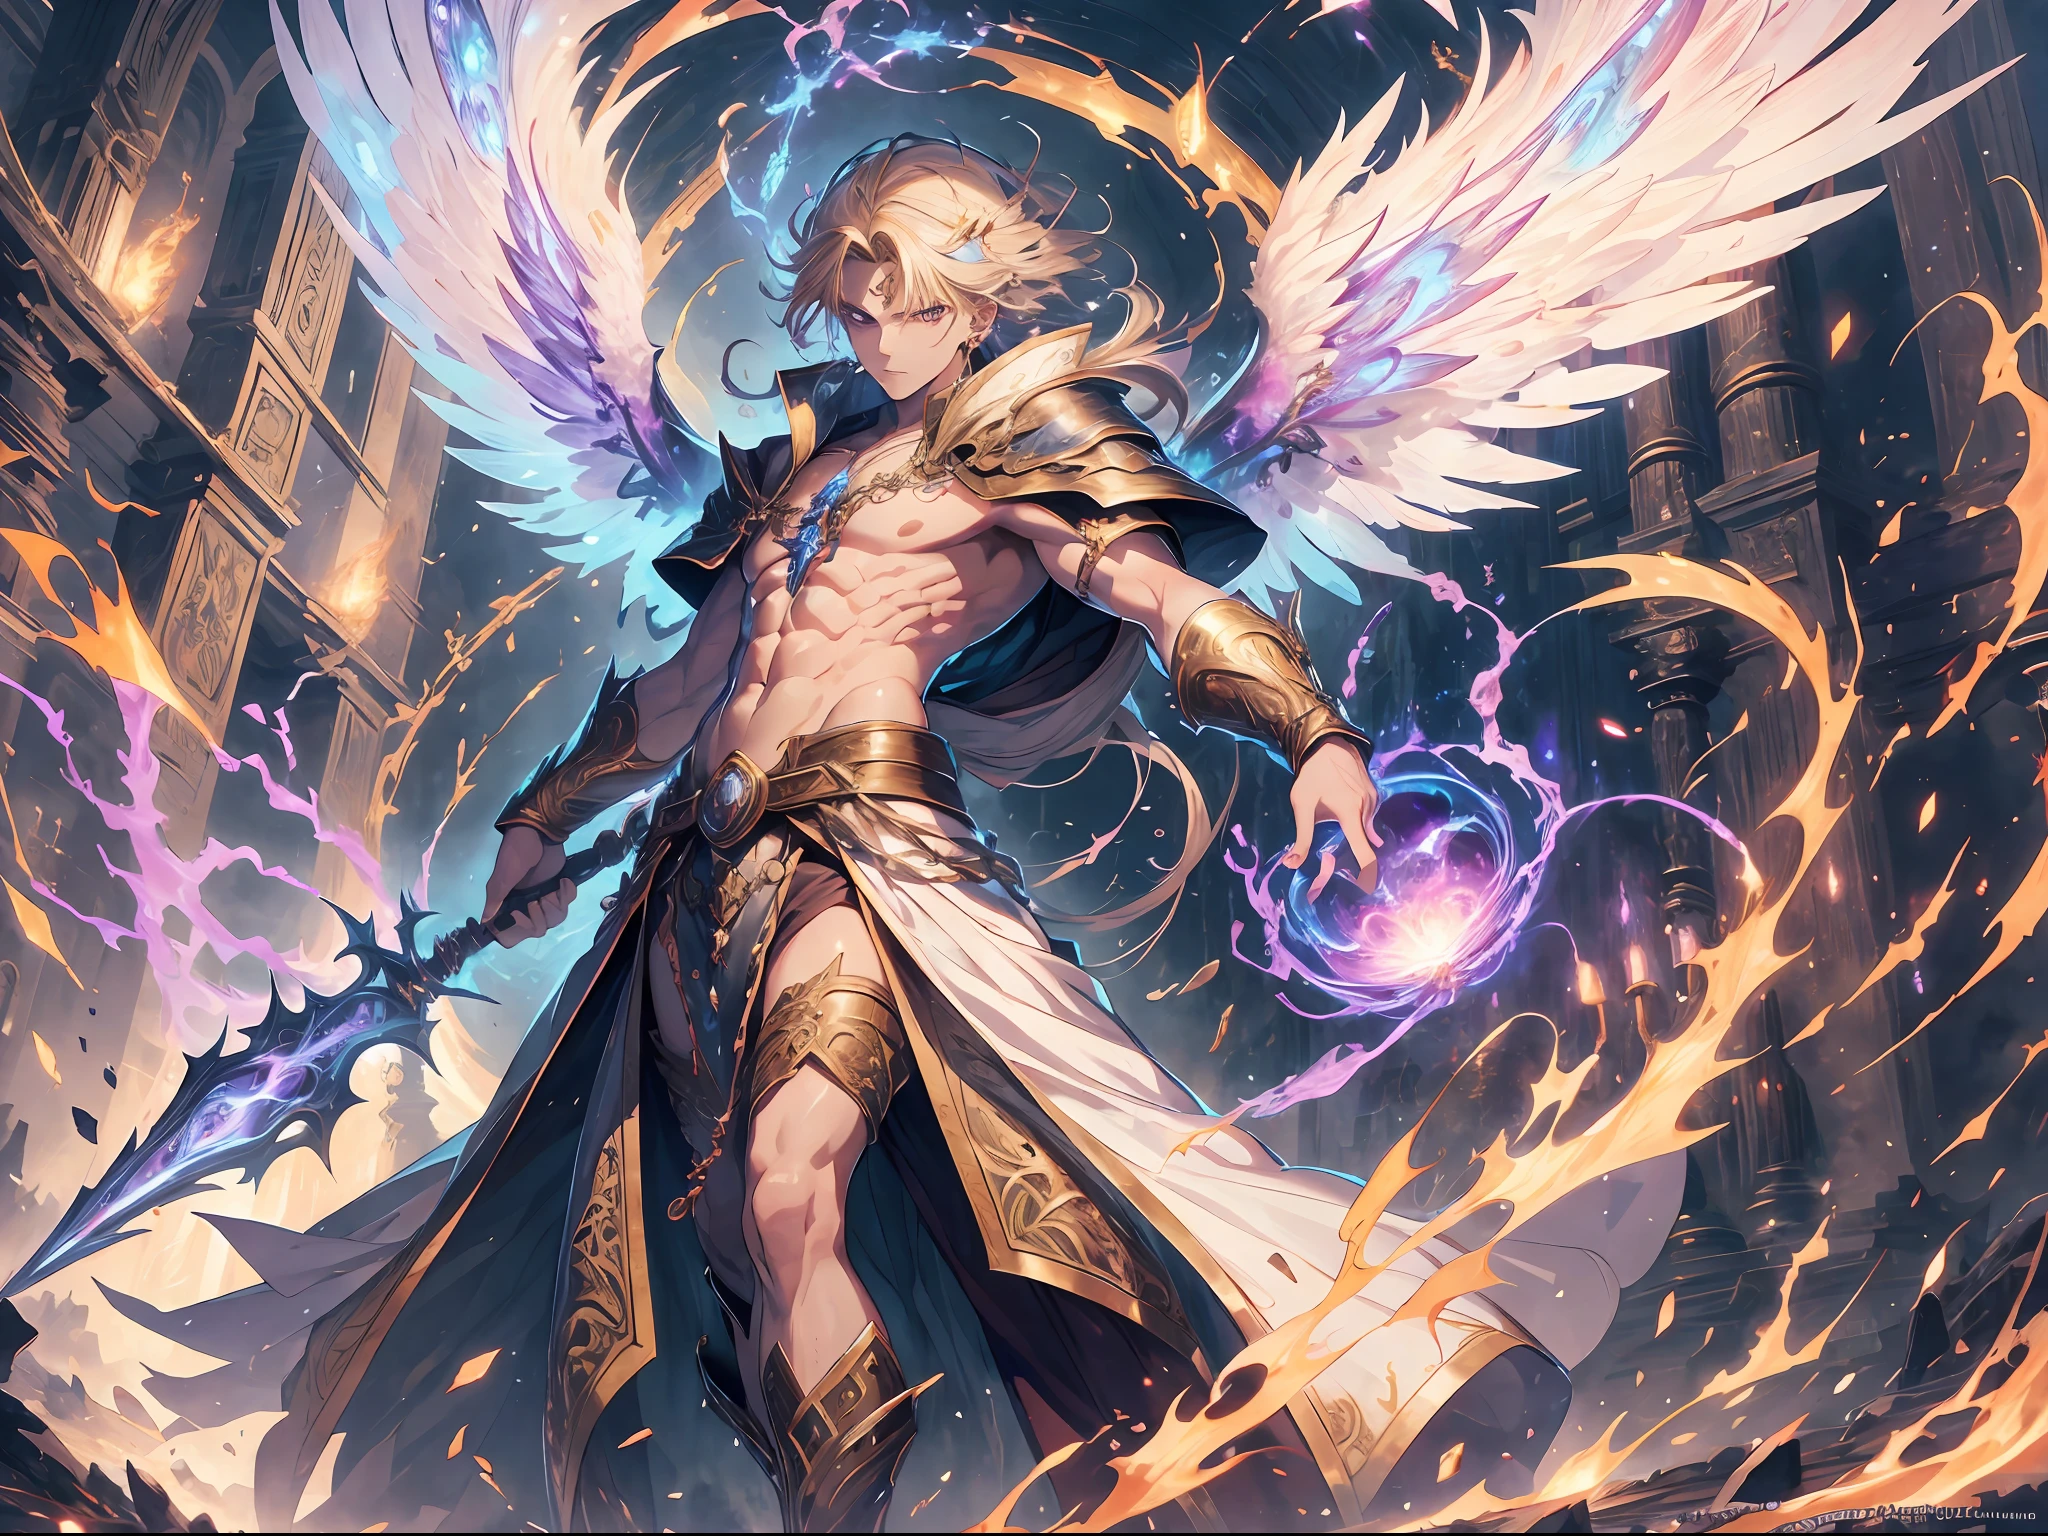 (absurd, high resolution, hyper-detailed, HDR), masterpiece, best quality, a boy in a white robe with a sickle, giant sickle, break, solo, long hair, blonde, red eyes, glowing eyes, fine eyes and detailed face, tall and muscular, bare chest muscles, earrings and accessories, six pairs of angel wings, archangel, full body, heavenly background, fantasy, celestial body, dramatic sky, glowing , blooming, swirl, spark, thunderbolt, magic vortex, ray, golden aura, battle stance, Behind the Dharma